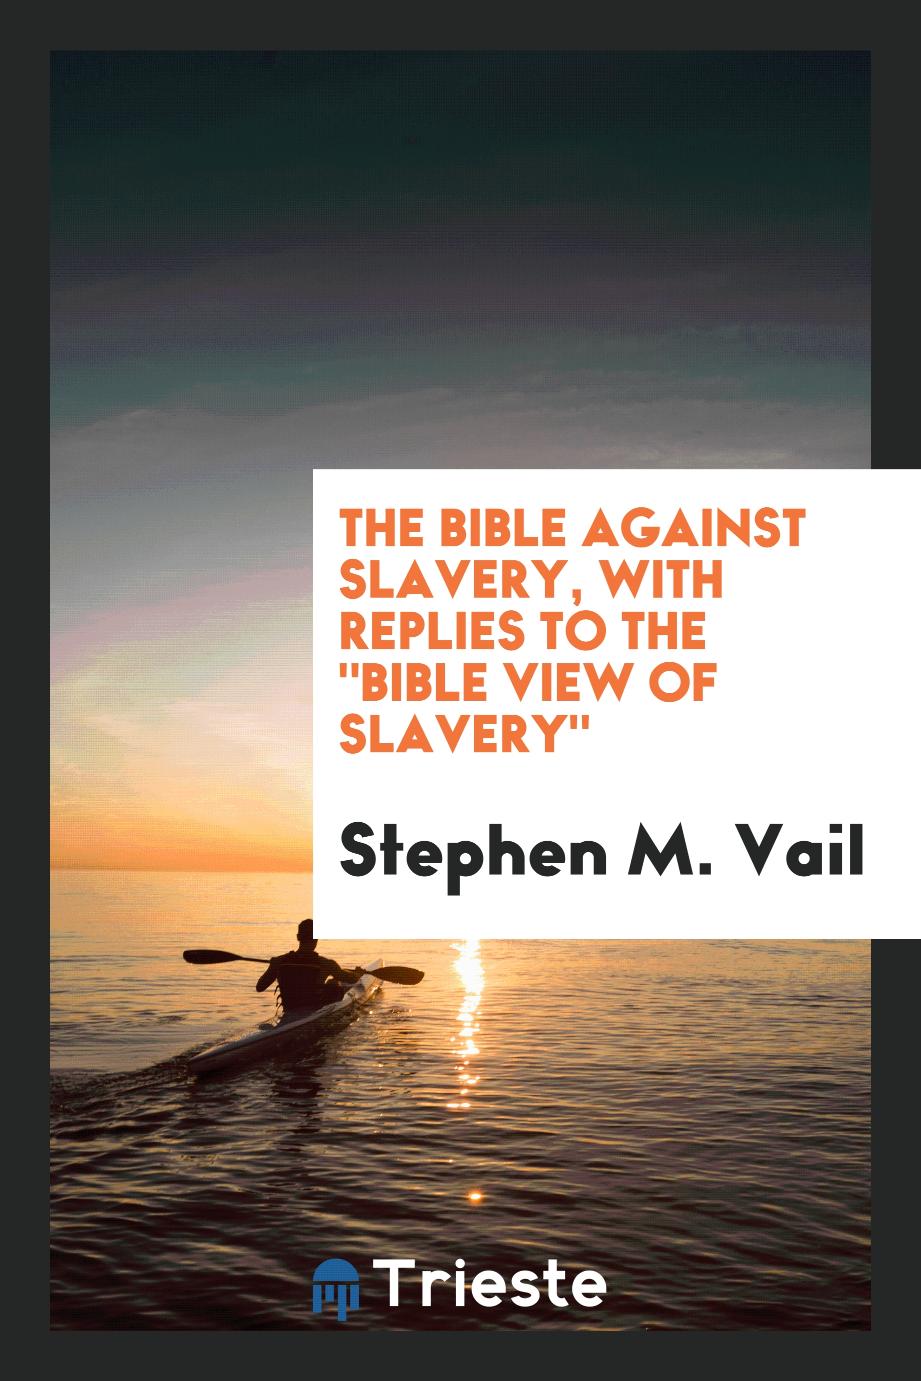 The Bible against slavery, with replies to the "Bible view of slavery"